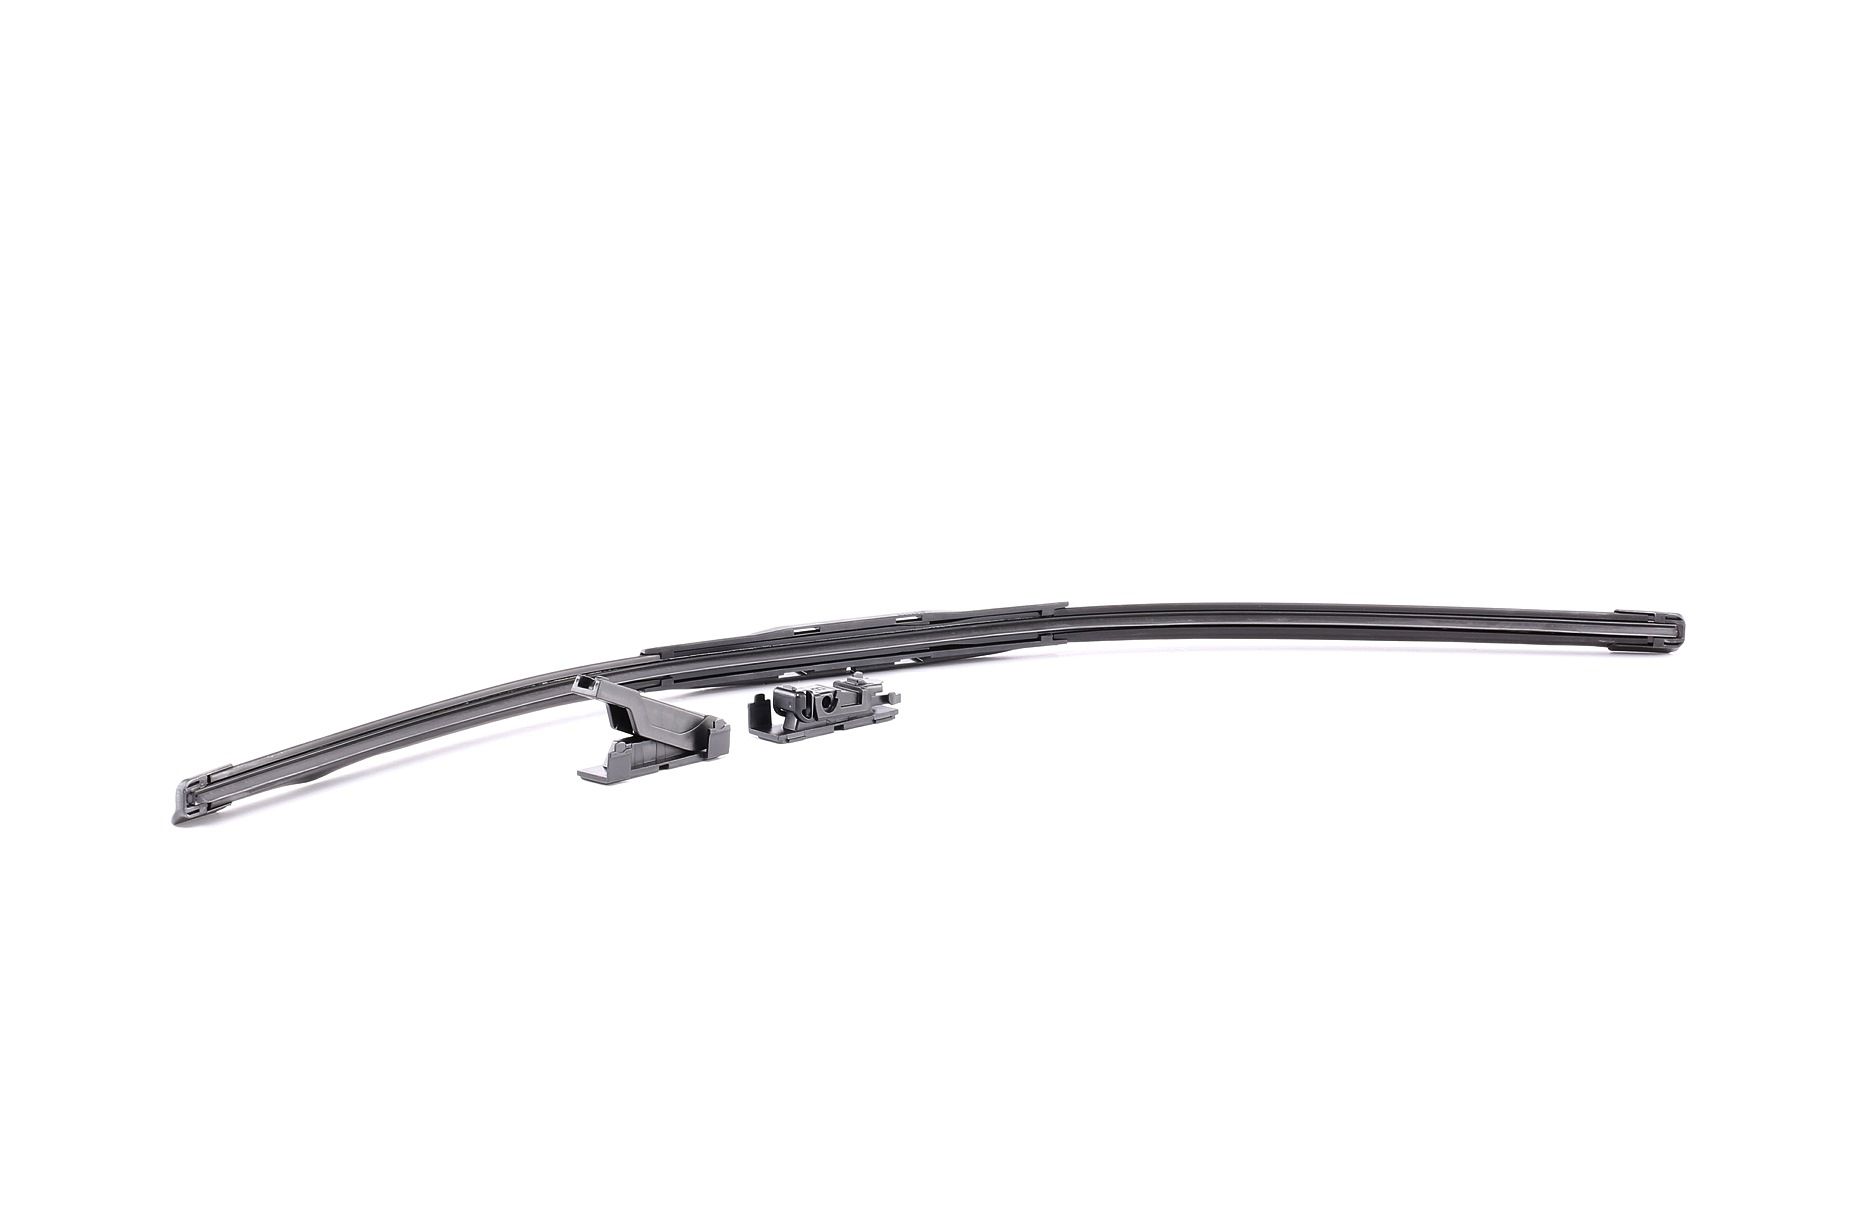 Original Continental 10202 Windshield wipers 2800011020280 for BMW i3